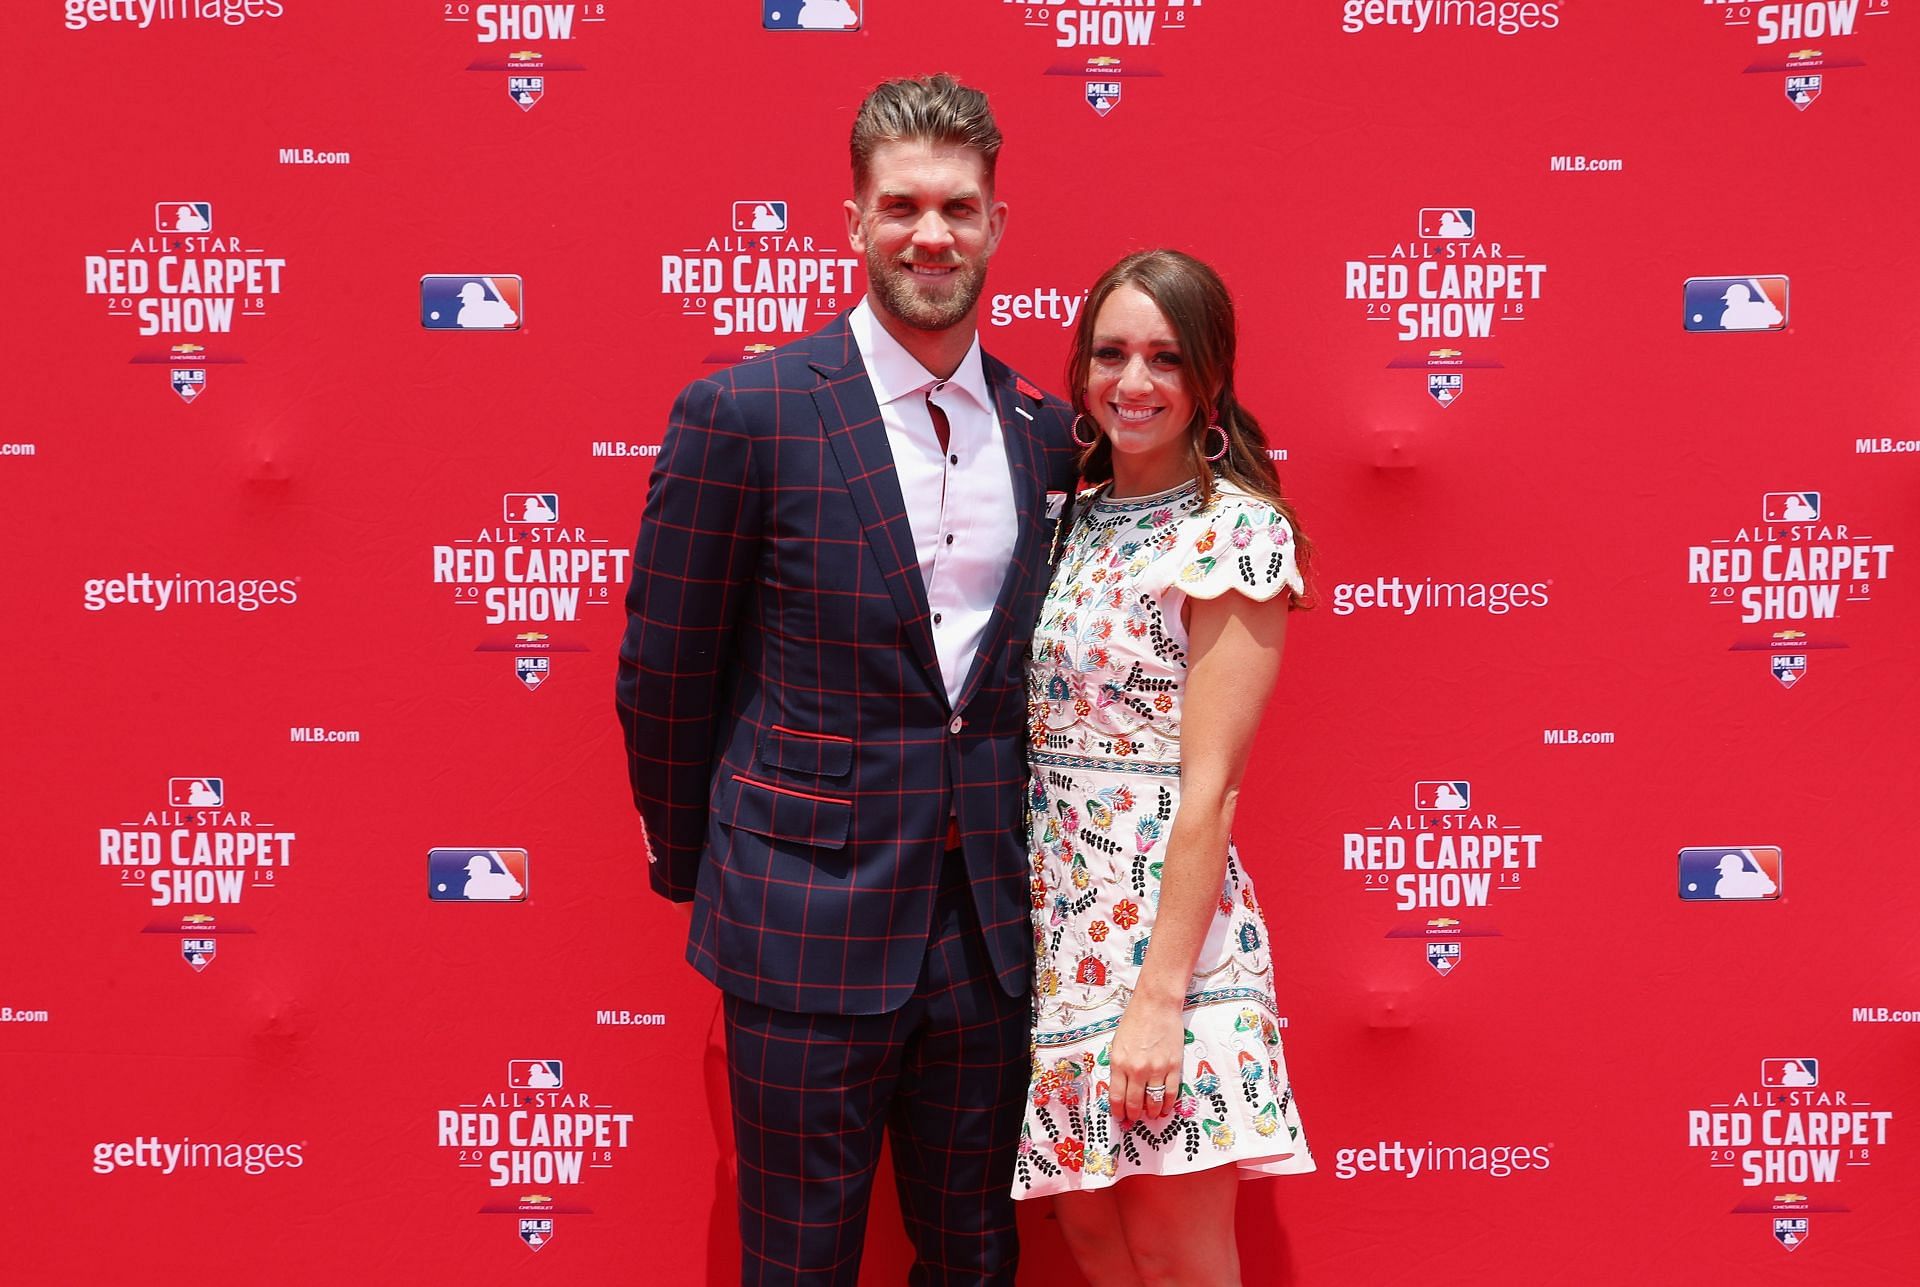 Nationals' Bryce Harper ecstatic to see bride on wedding day